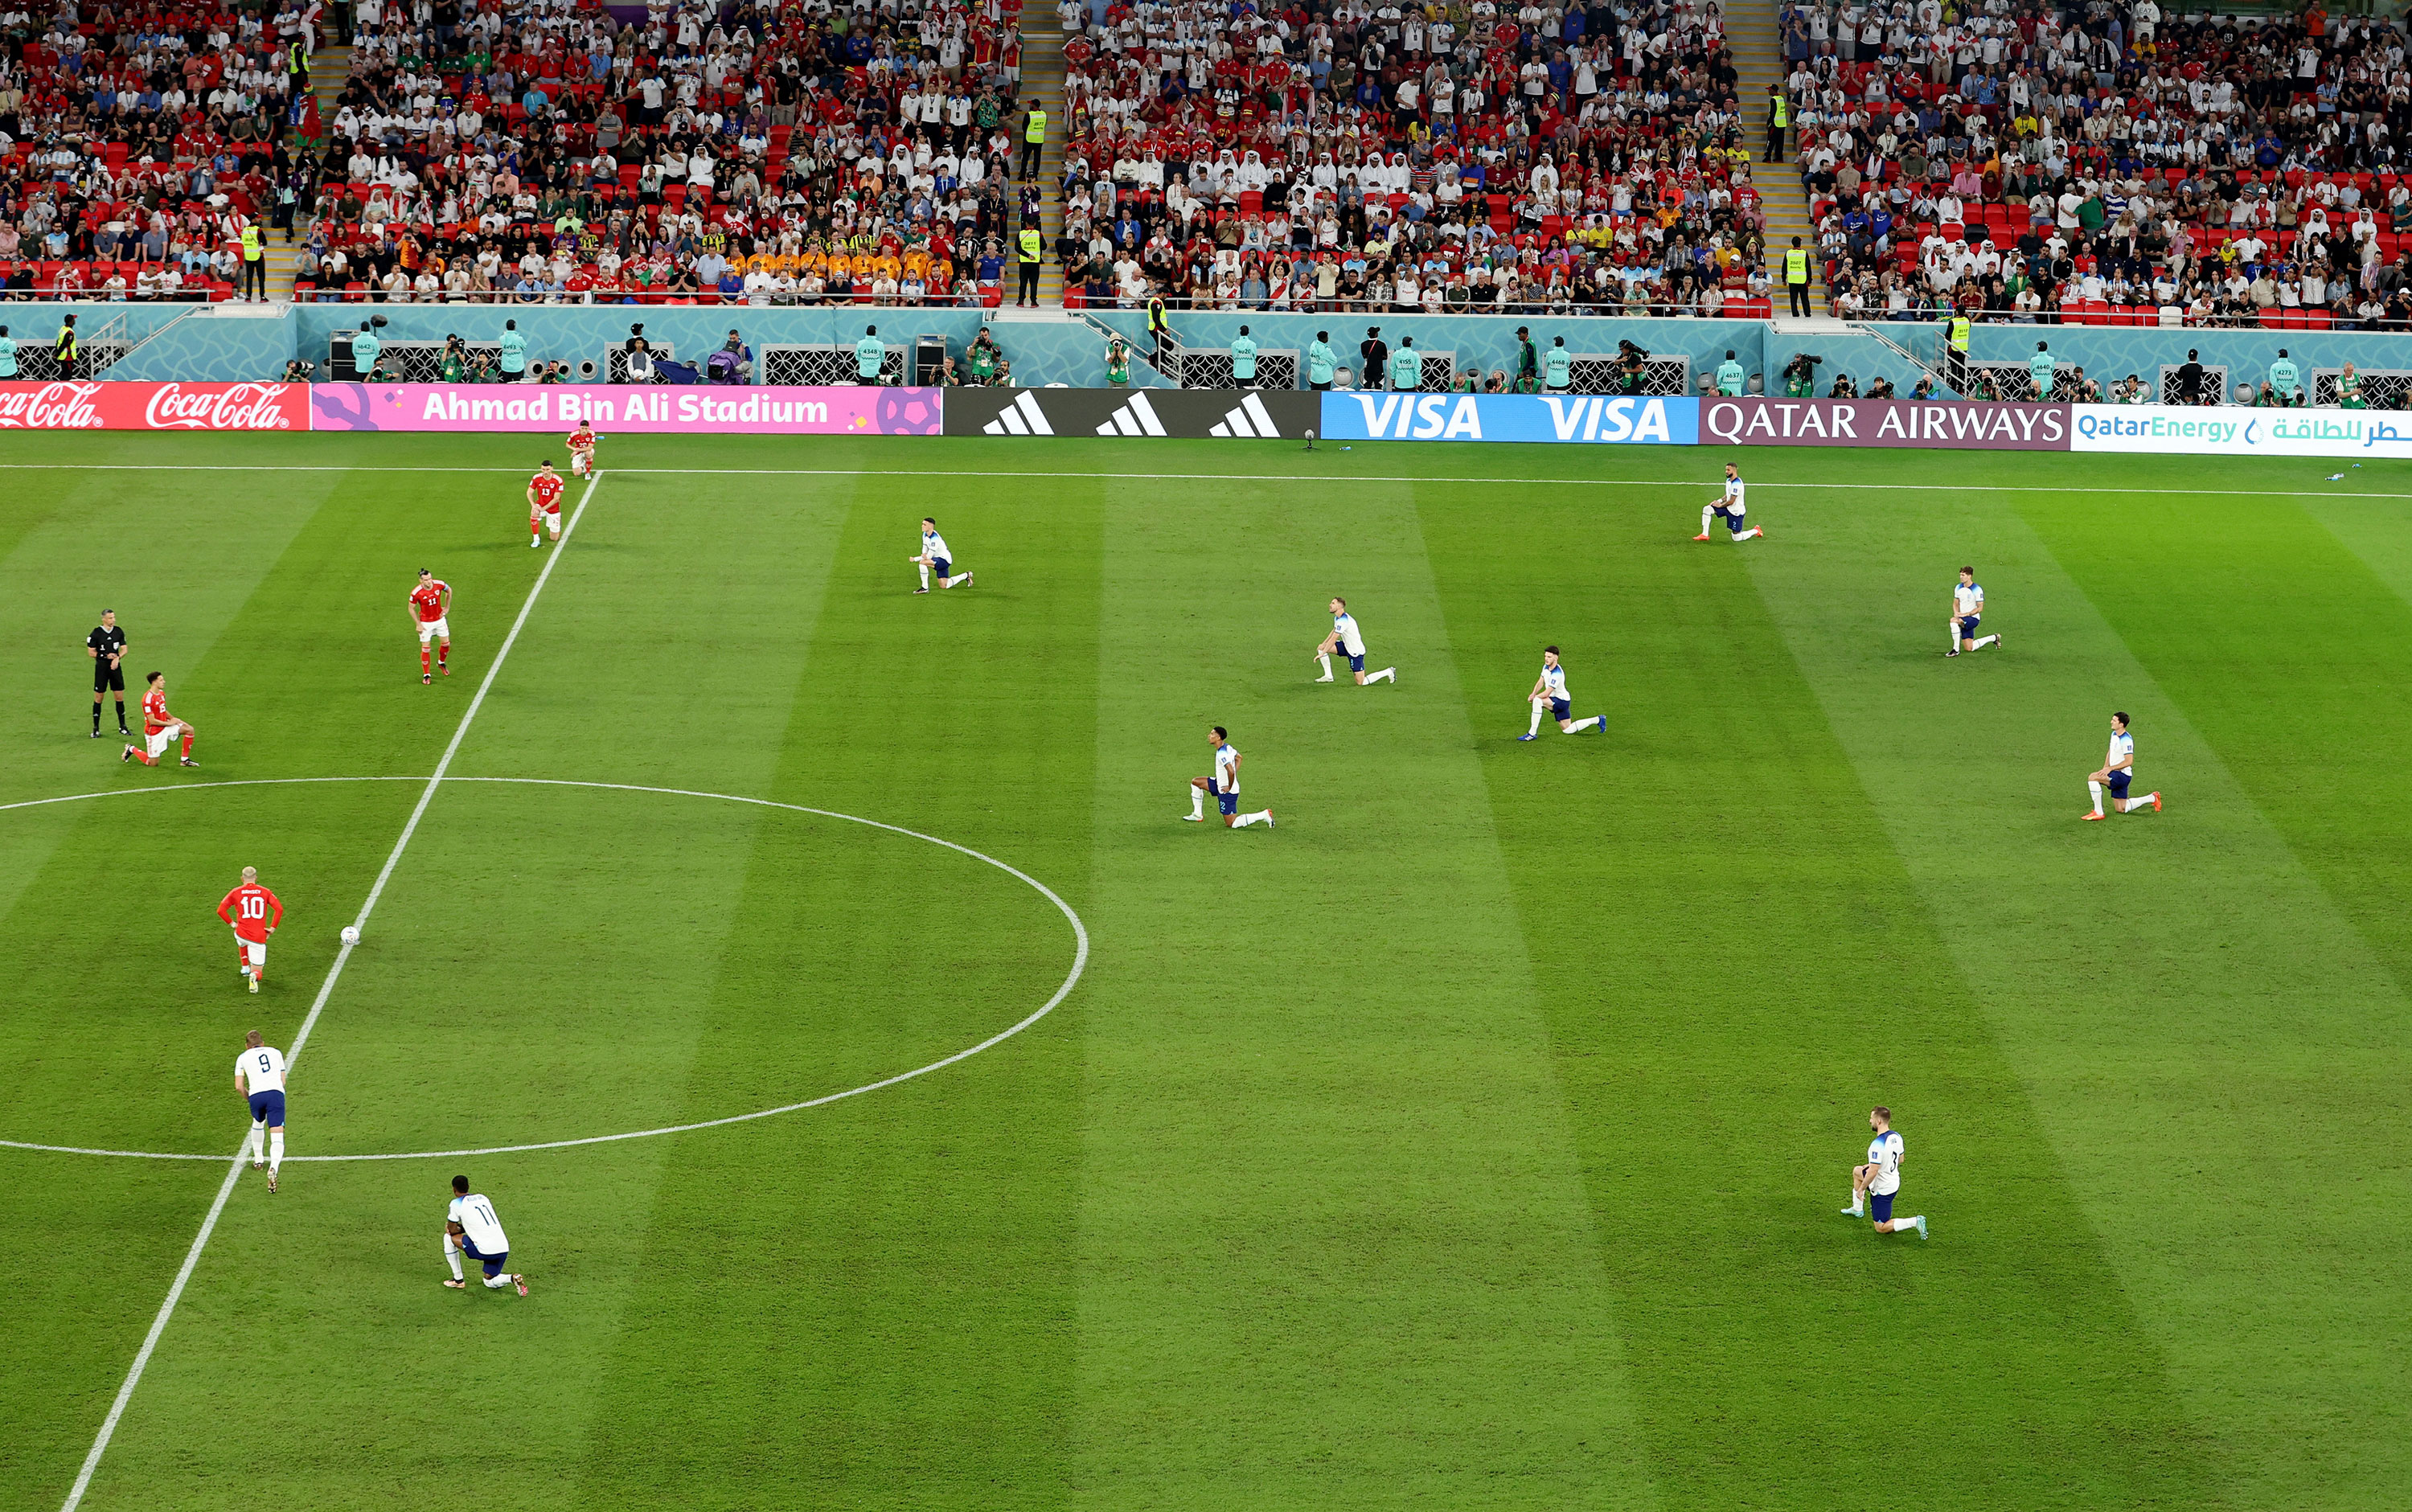 England players take a knee before the match against Wales on Tuesday.